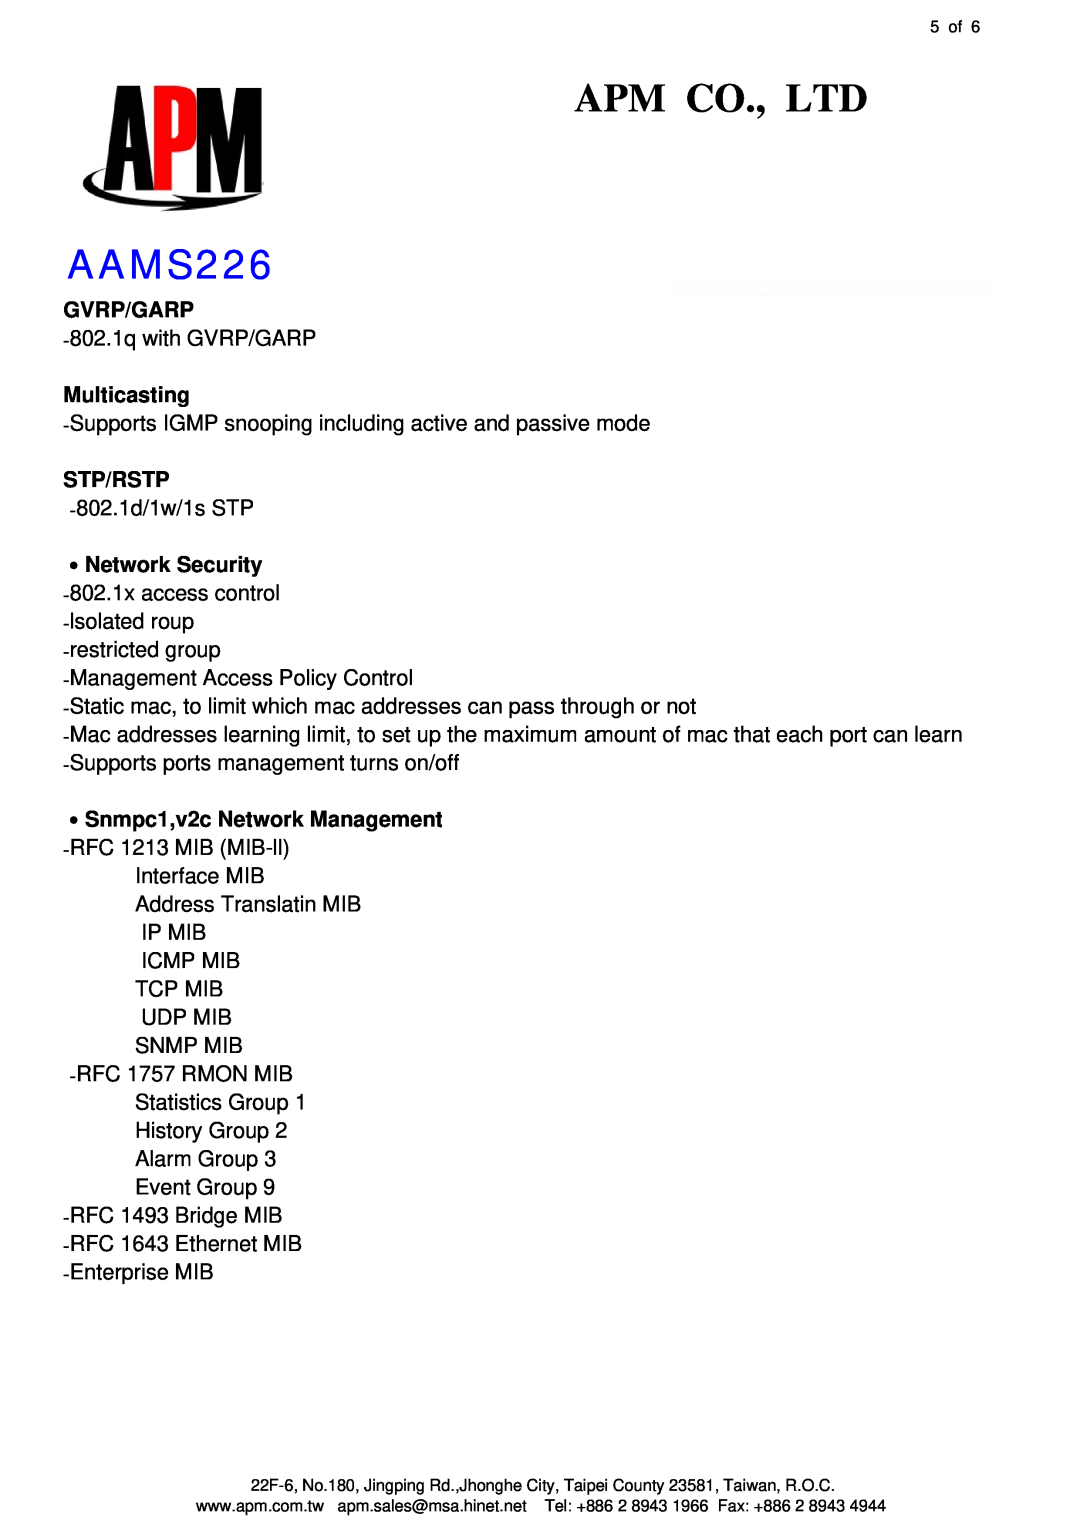 APM AAMS226 specifications Gvrp/Garp, Multicasting, Stp/Rstp, ․Network Security, ․Snmpc1,v2c Network Management 